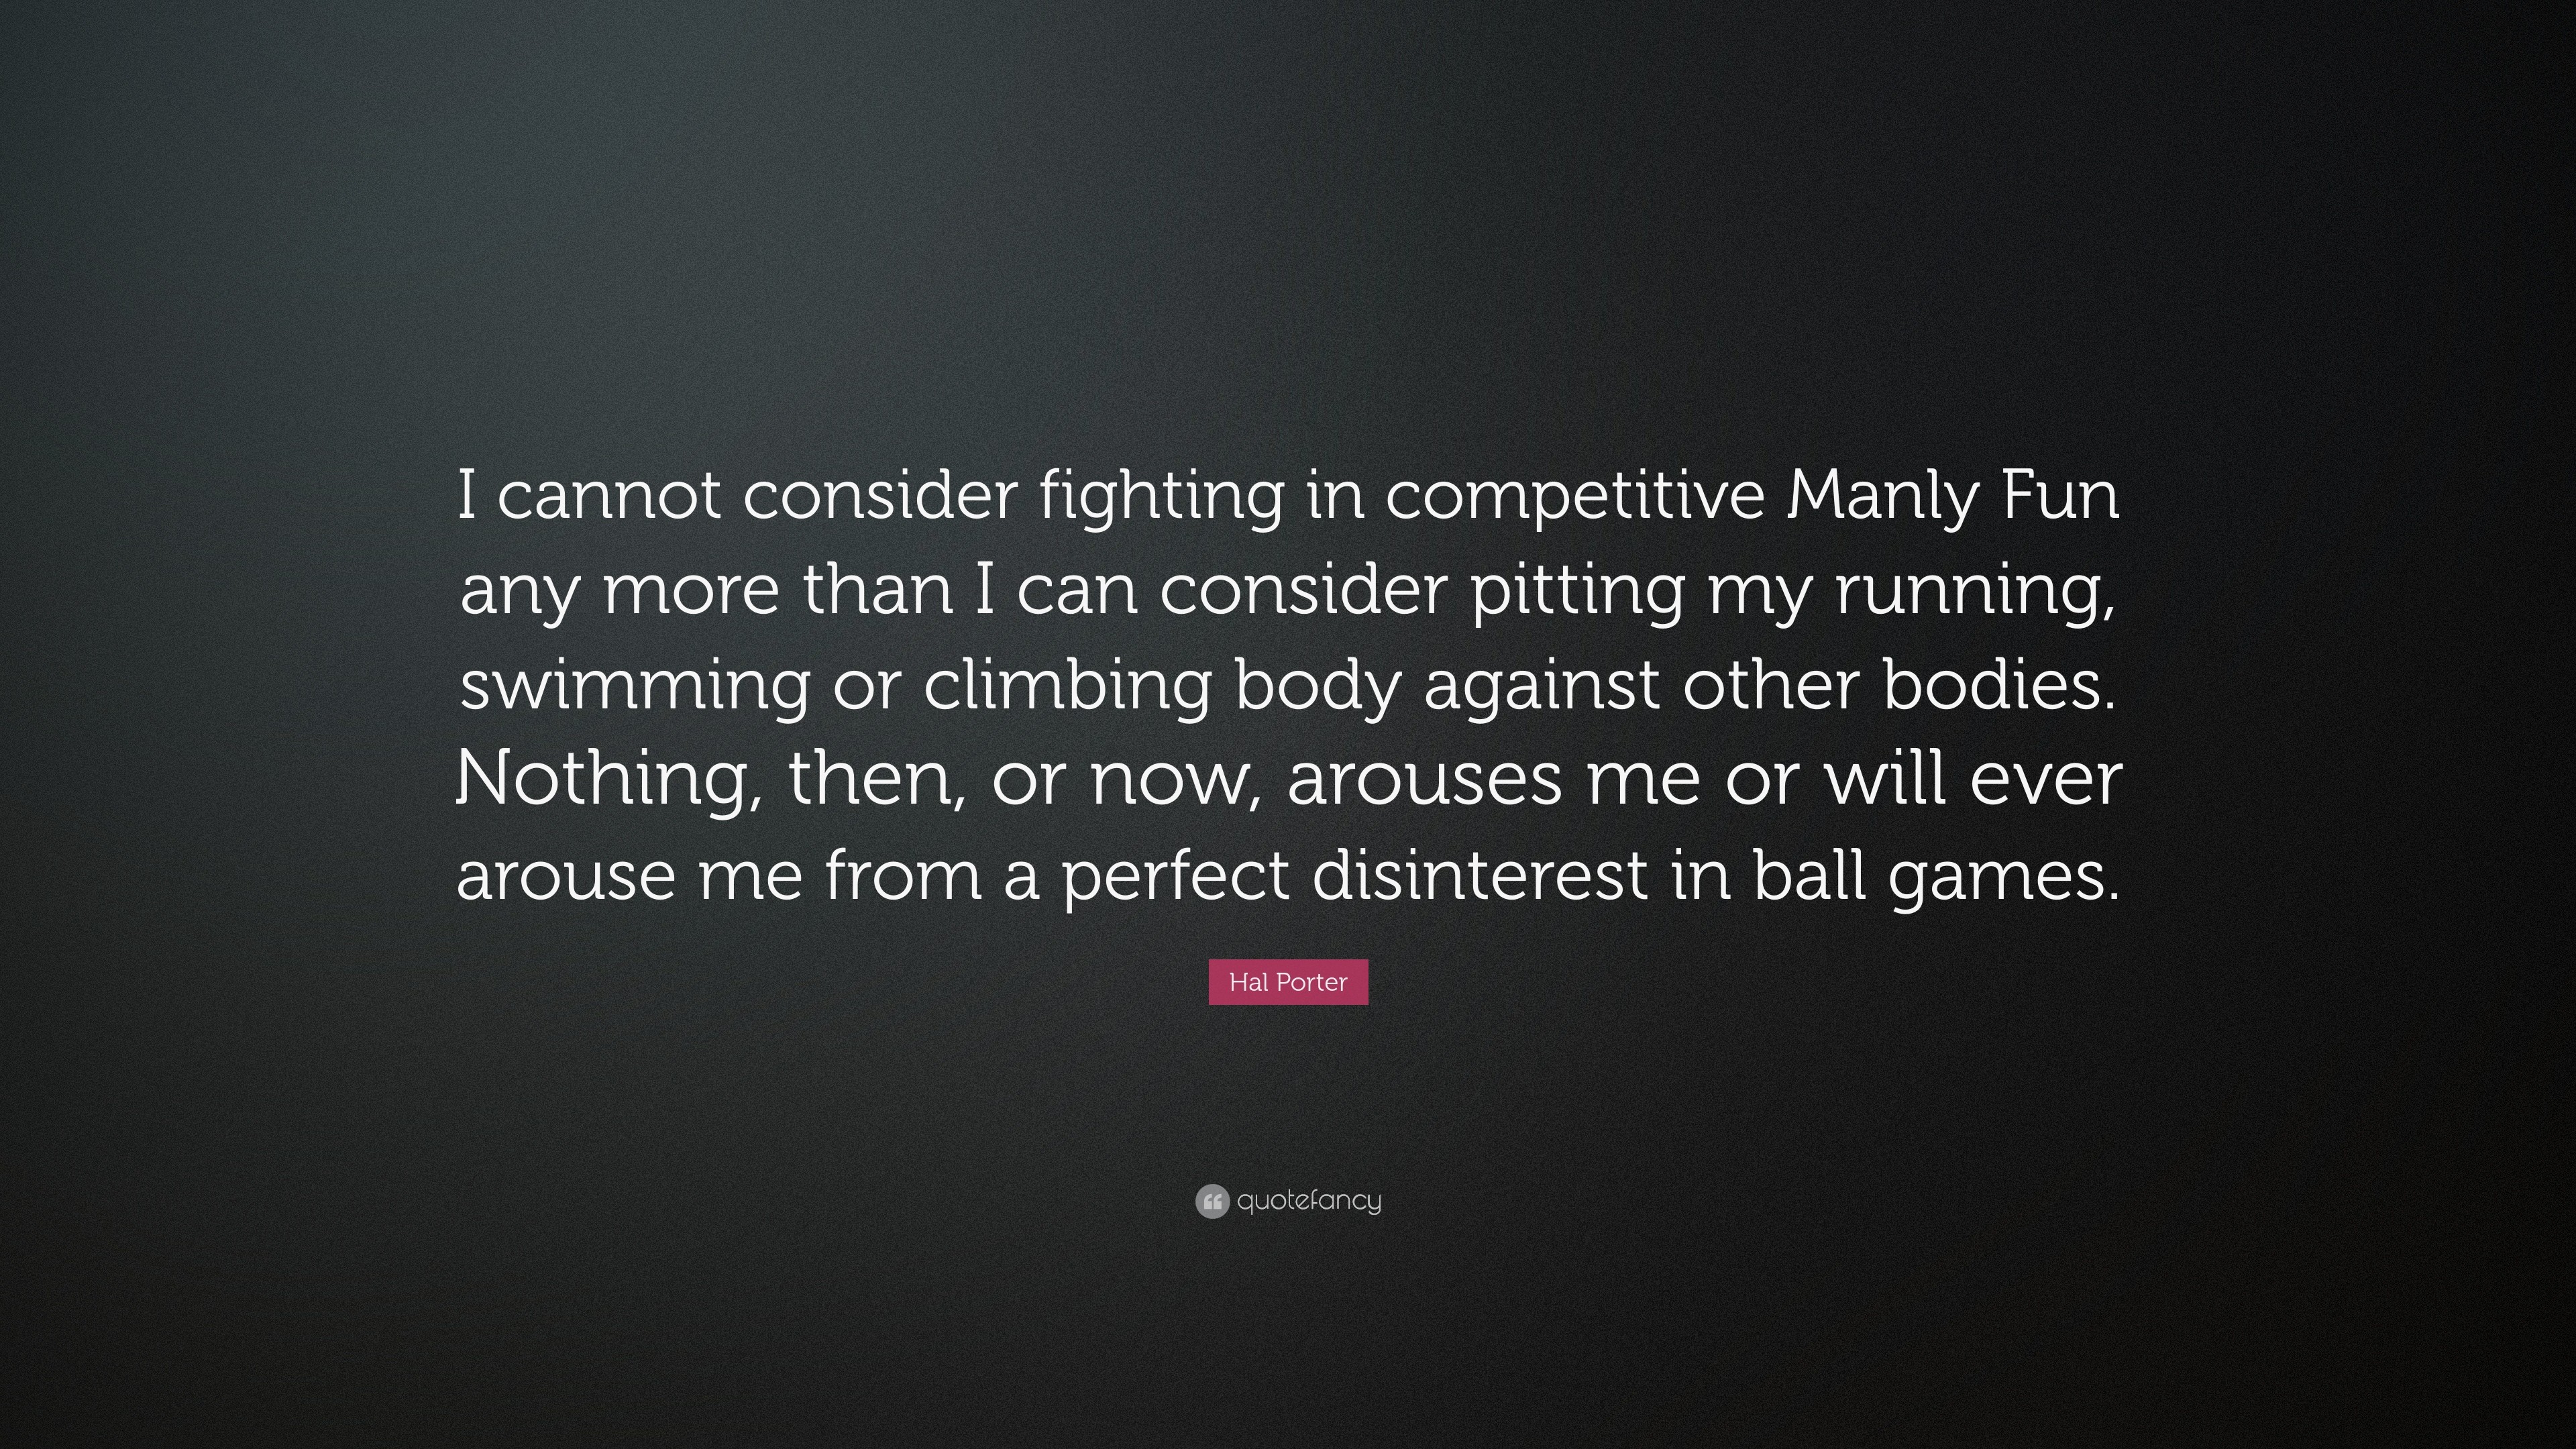 3840x2160 Hal Porter Quote: “I cannot consider fighting in competitive Manly Fun any  more than